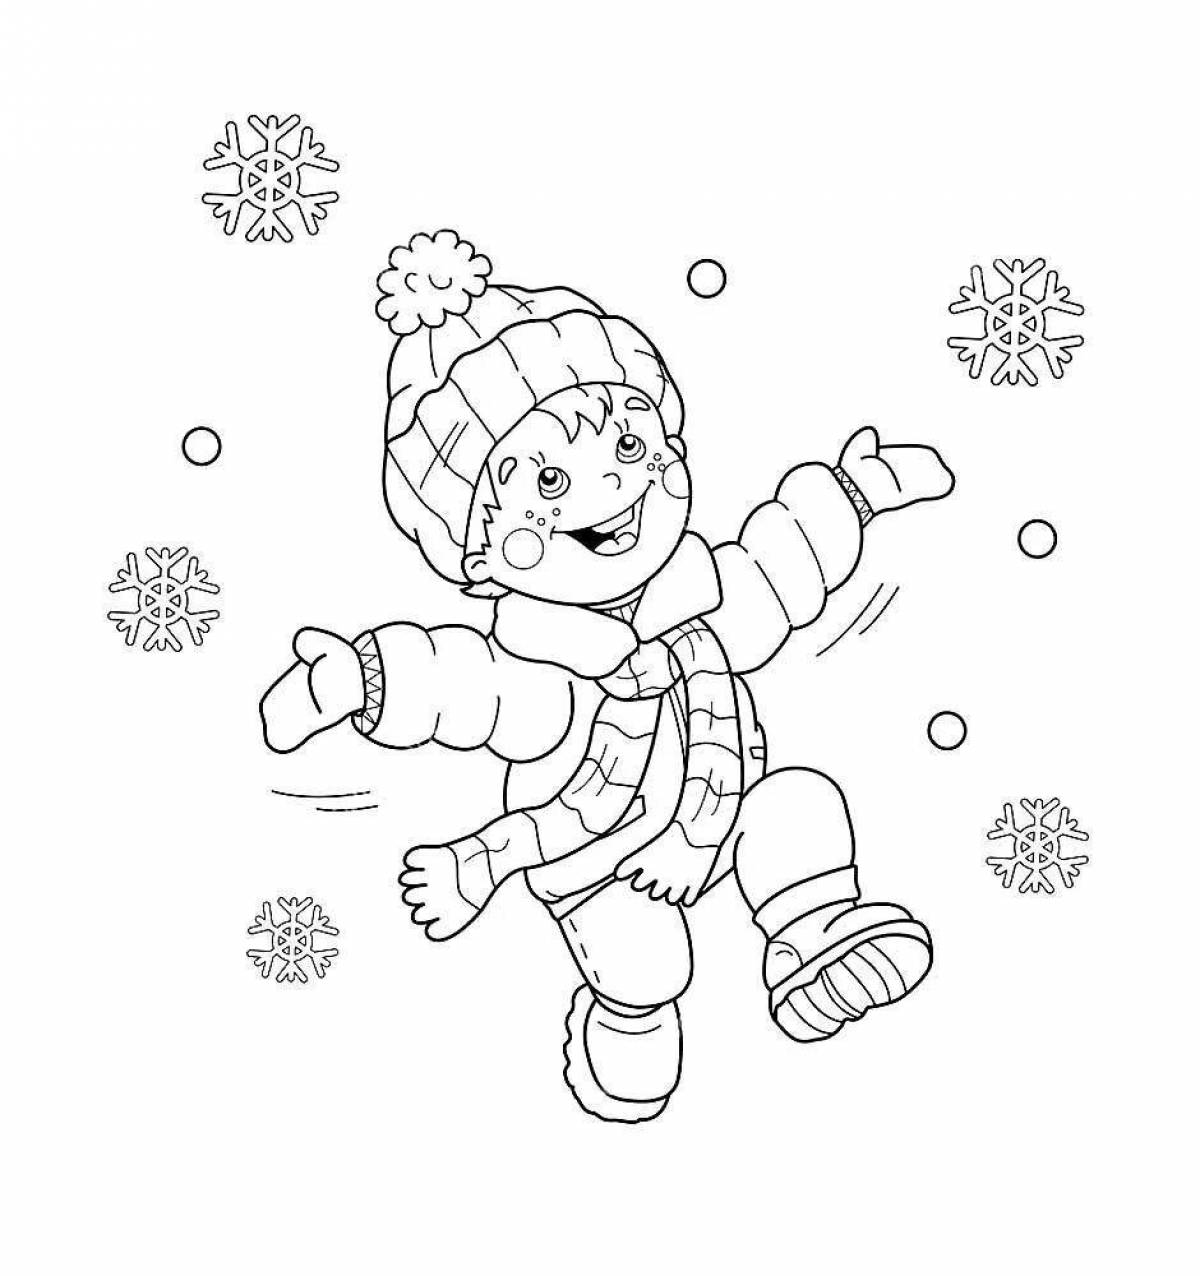 A fun snowball fight coloring book for kids